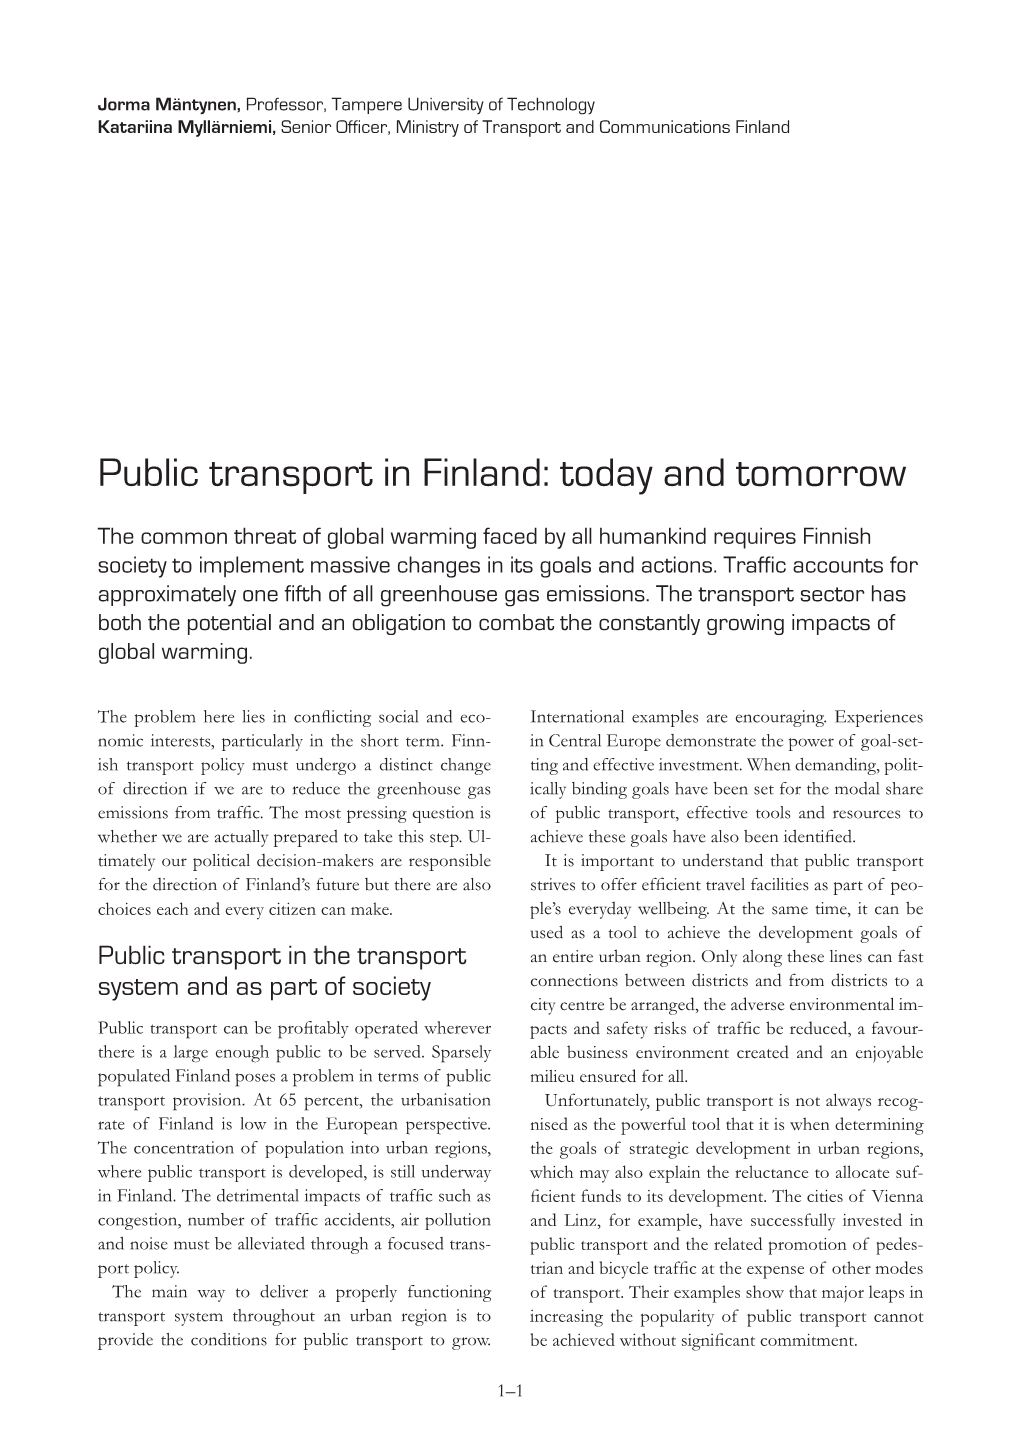 Public Transport in Finland: Today and Tomorrow